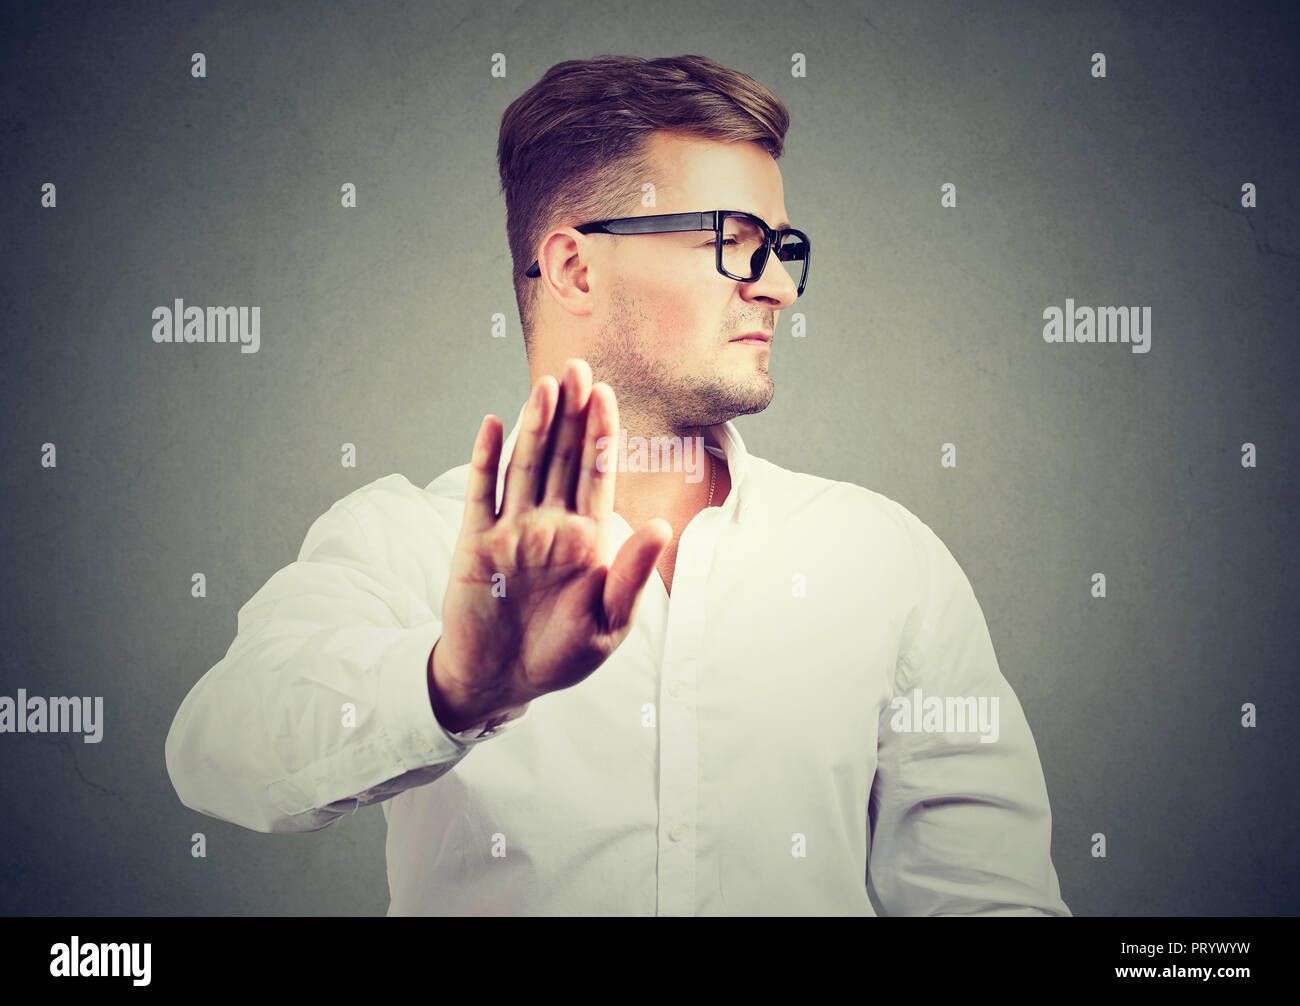 Annoyed angry man with bad attitude giving talk to hand gesture isolated on gray background. Negative human emotion face expression feeling body langu Stock Photo